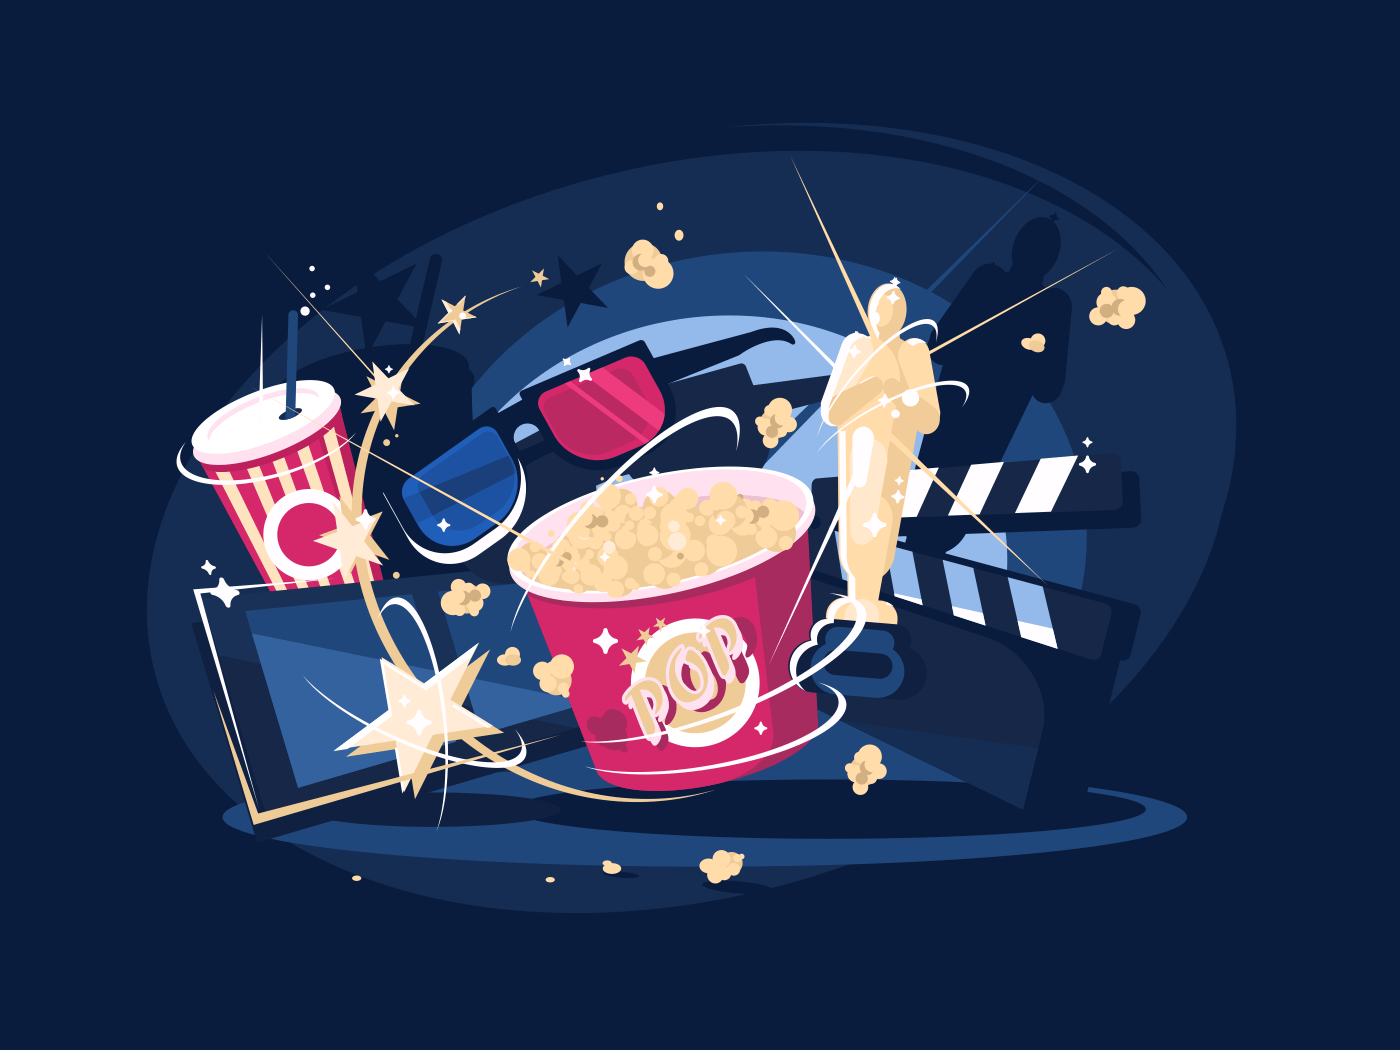 Film industry. Cinema accessories popcorn, award and 3d glasses. Vector illustration